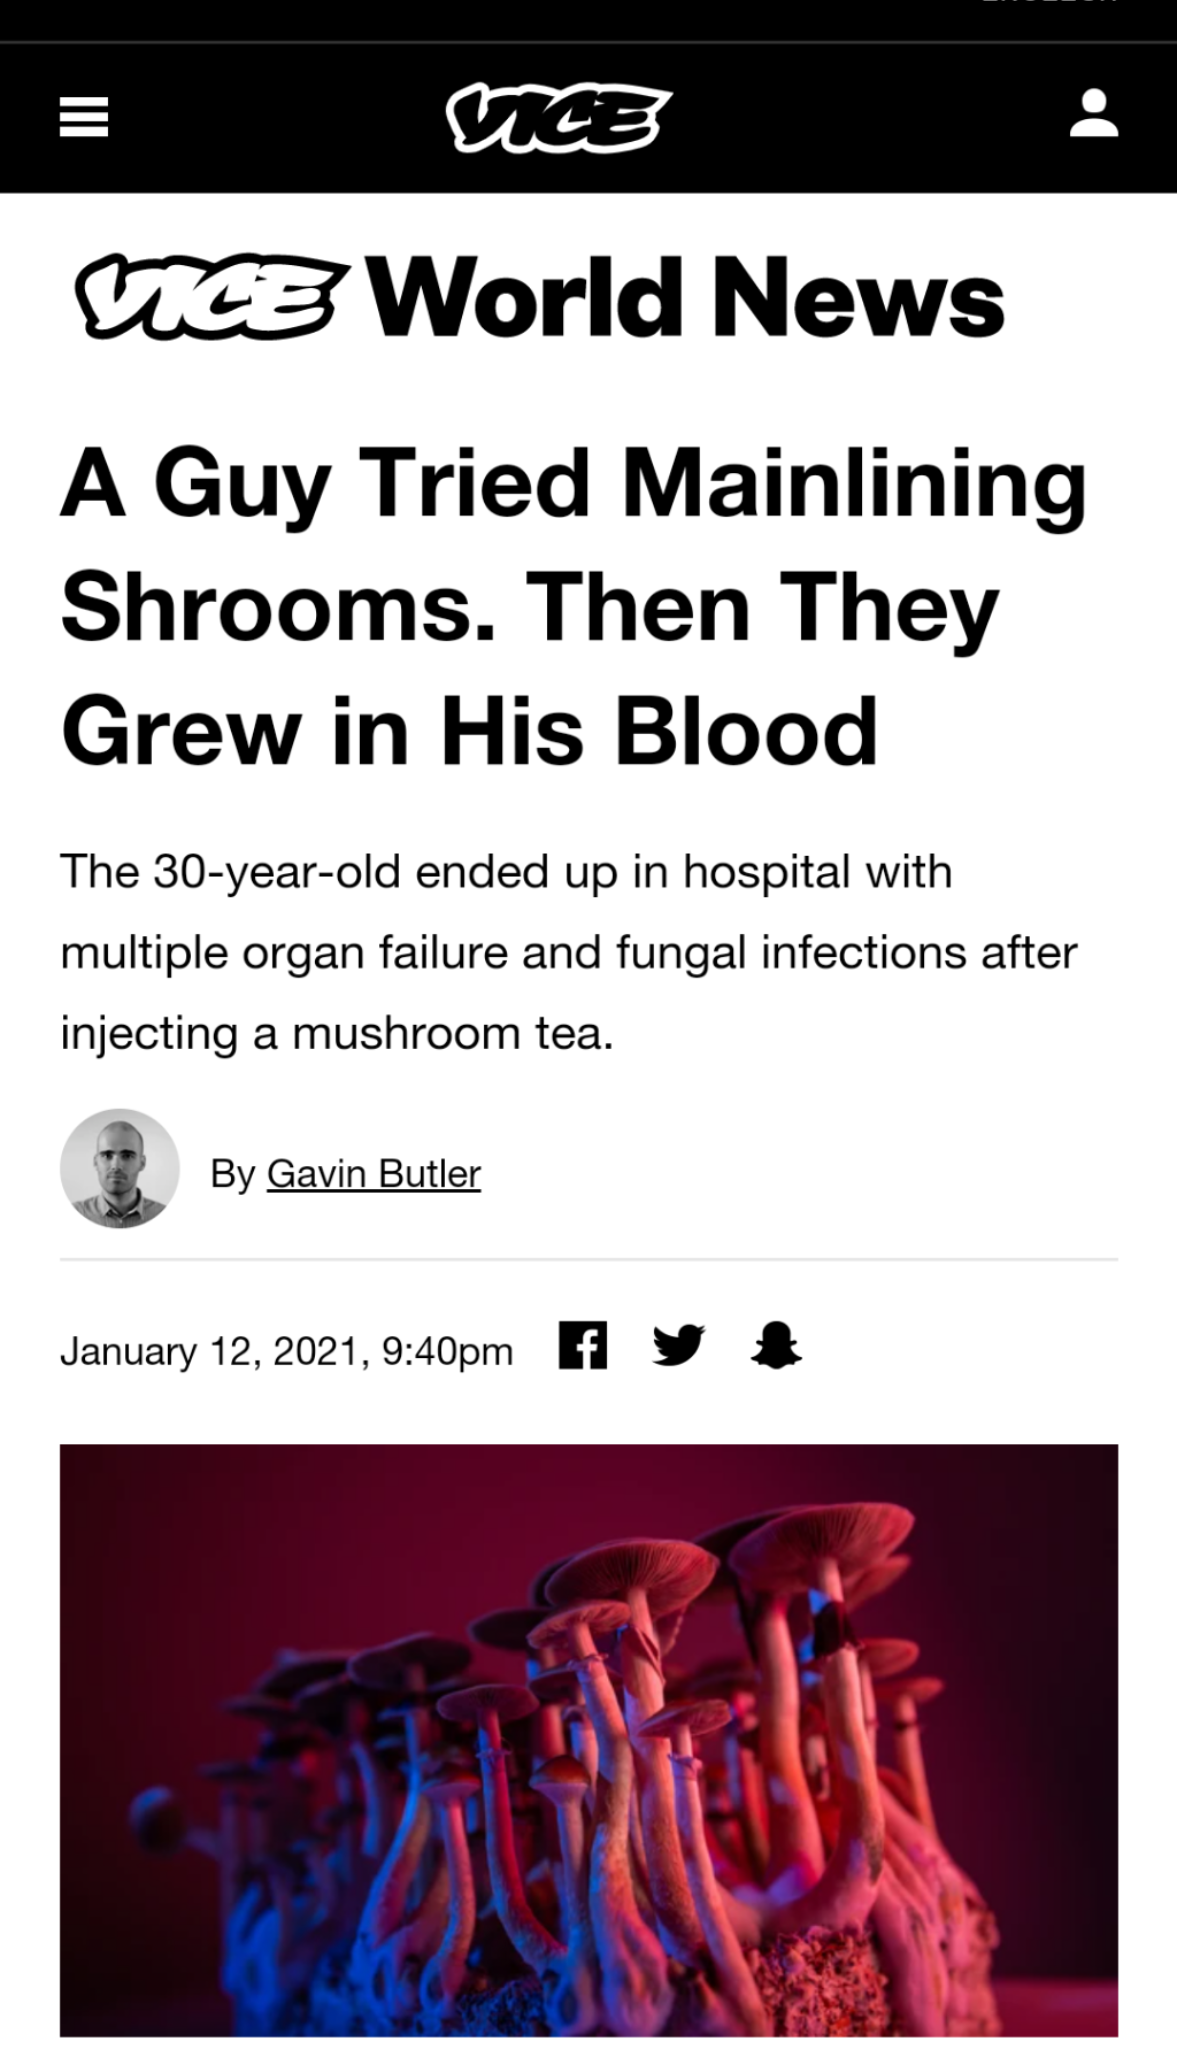 vice - Ju Vice Vice World News A Guy Tried Mainlining Shrooms. Then They Grew in His Blood The 30yearold ended up in hospital with multiple organ failure and fungal infections after injecting a mushroom tea. By Gavin Butler , pm ny!